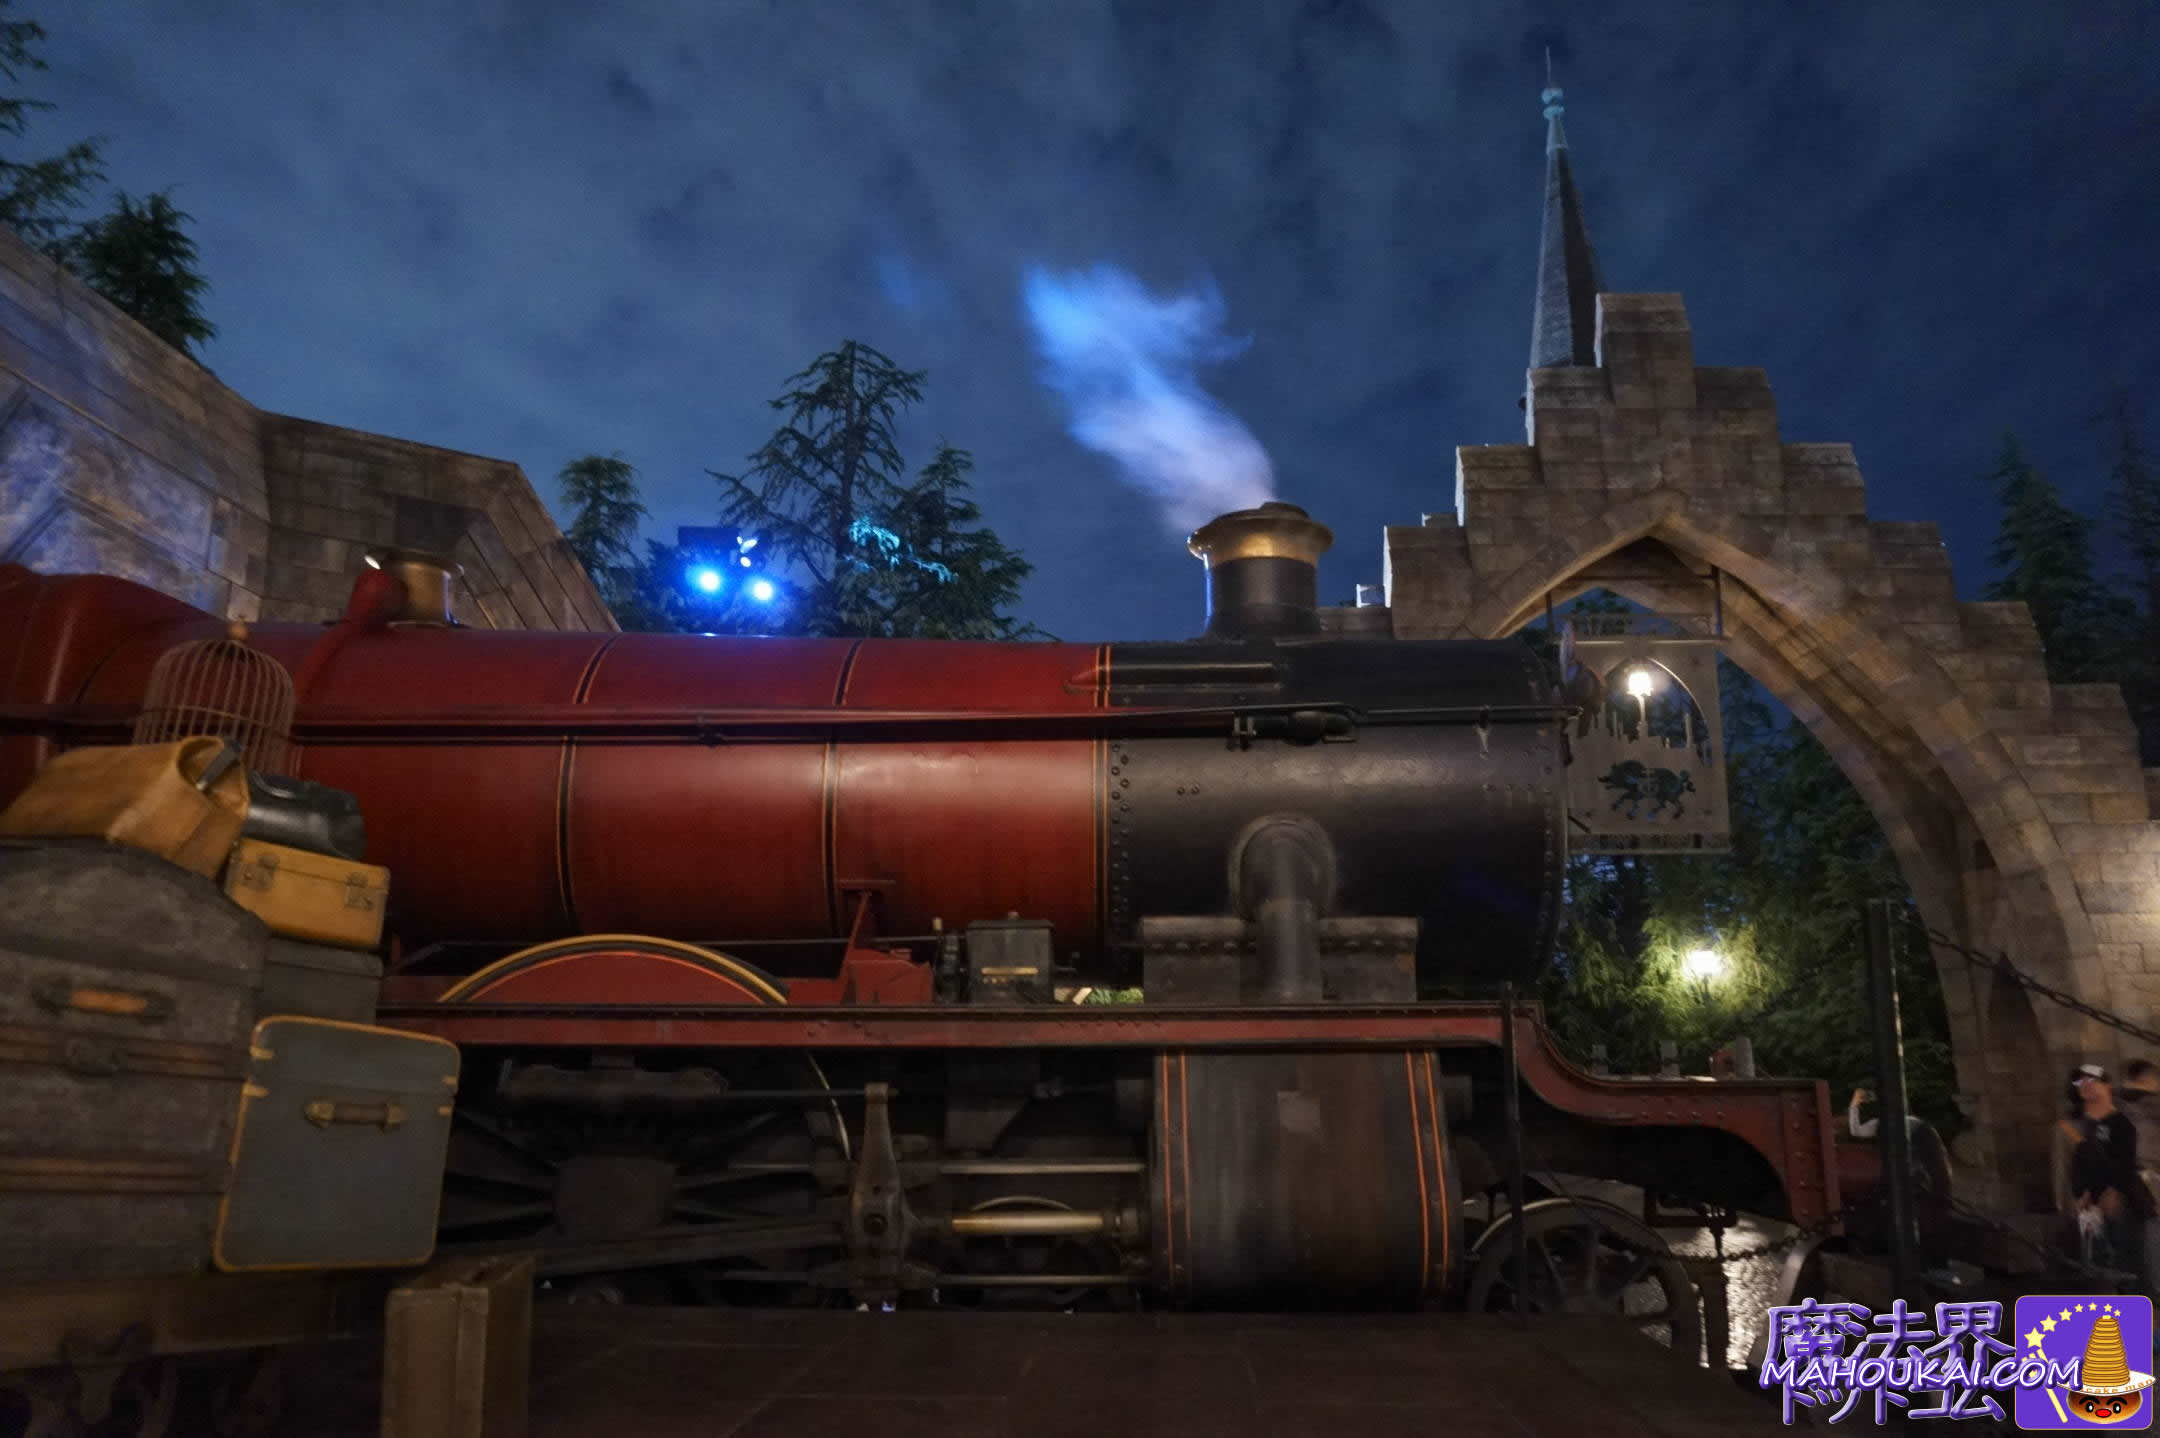 Photo Opportunity on the Hogwarts Express Paid USJ